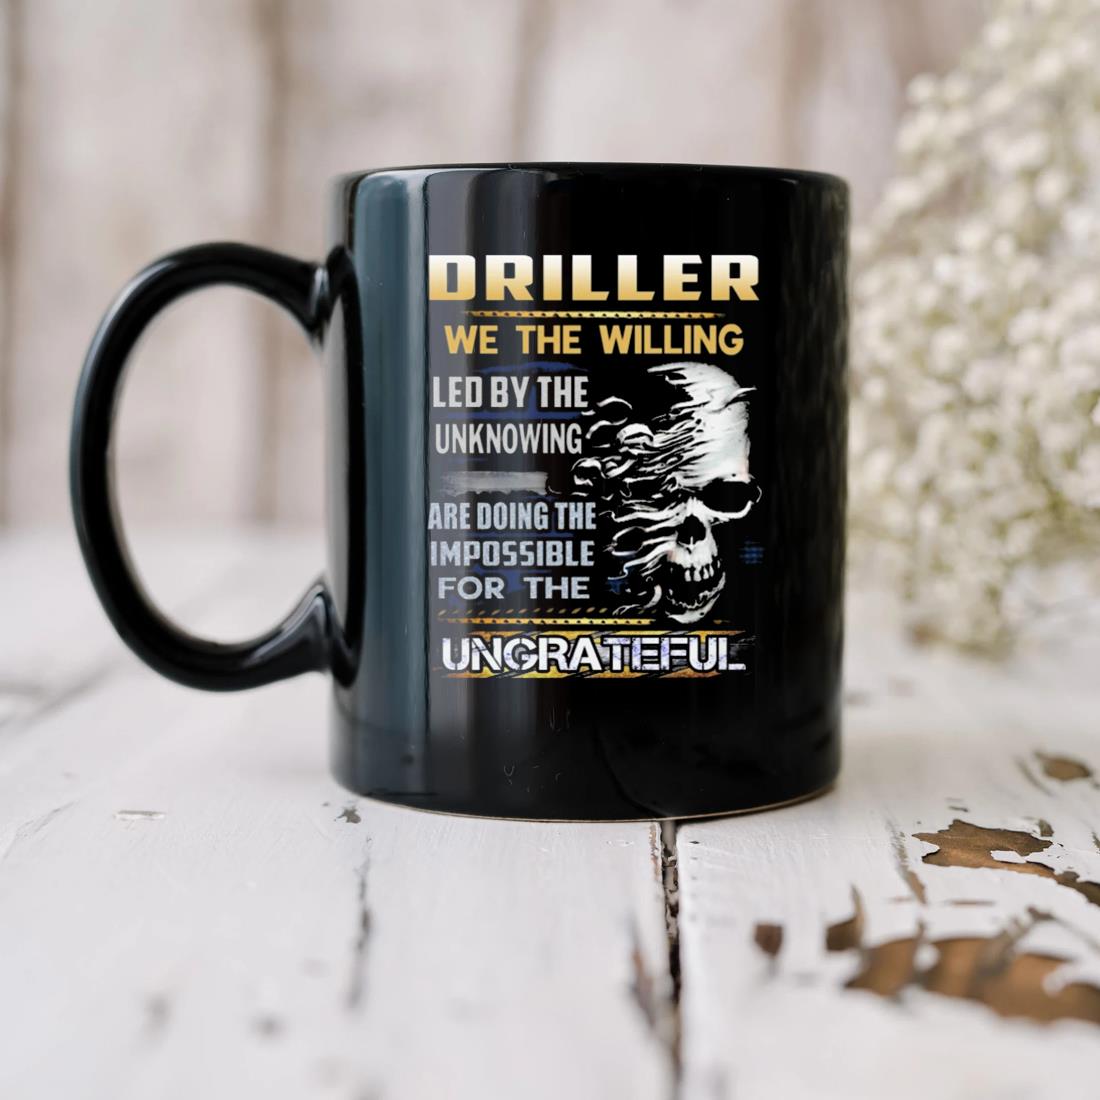 Driller We The Willing Led By The Unknowing Are Doing The Impossible For The Ungrateful Mug